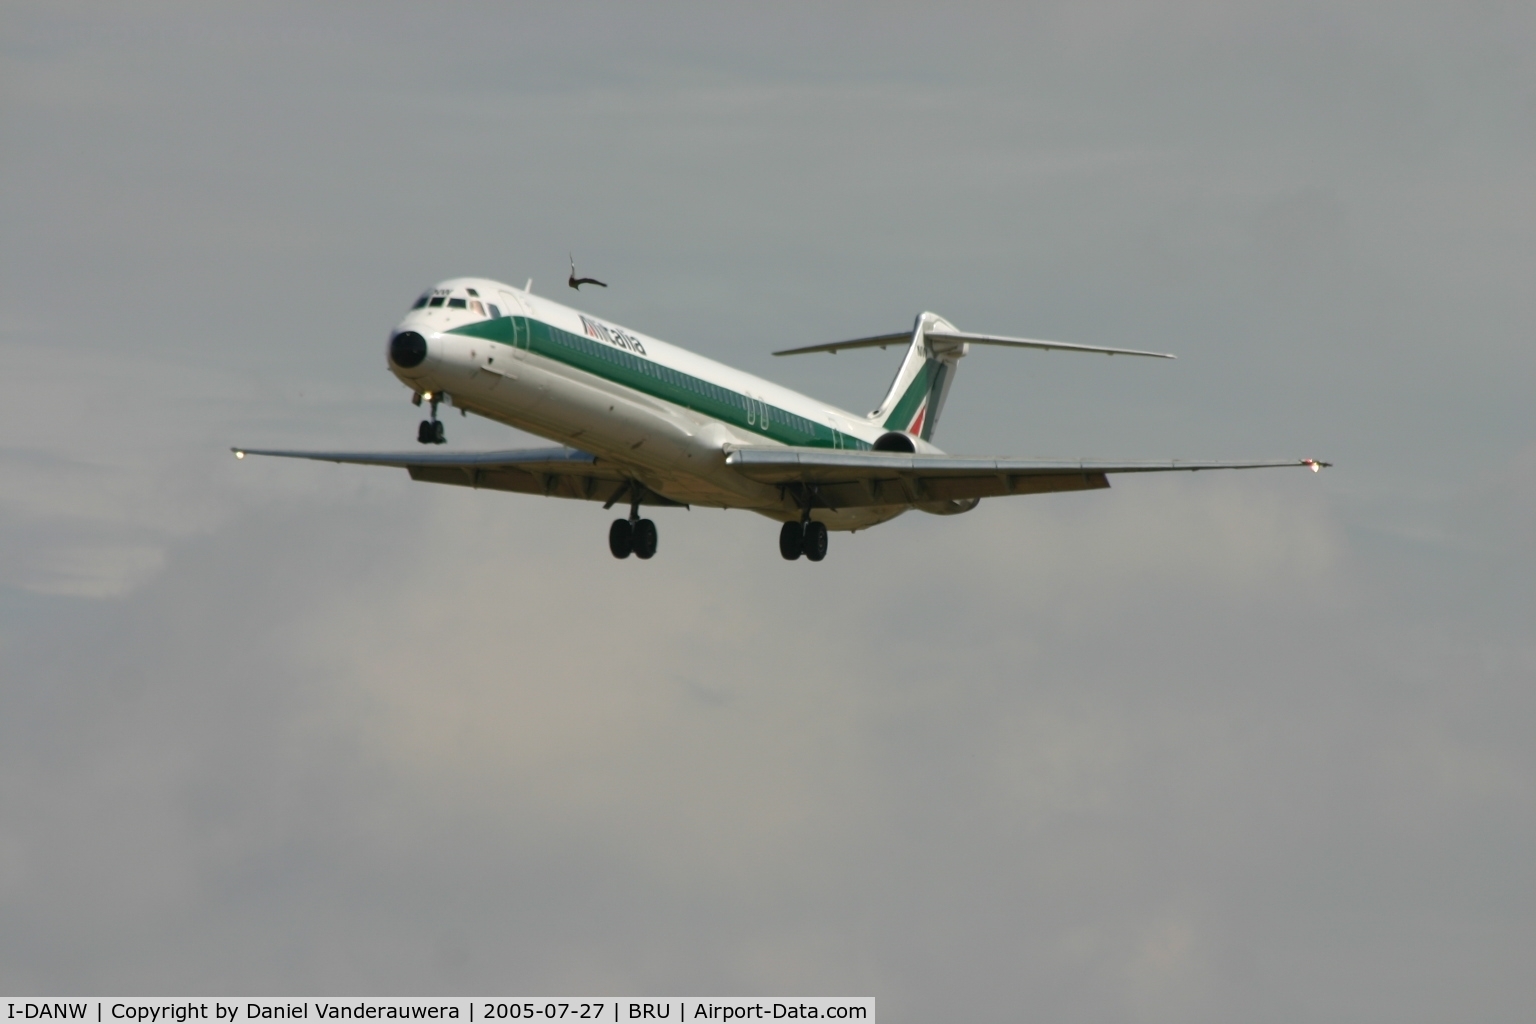 I-DANW, 1992 McDonnell Douglas MD-82 (DC-9-82) C/N 53206, do not worry for the bird